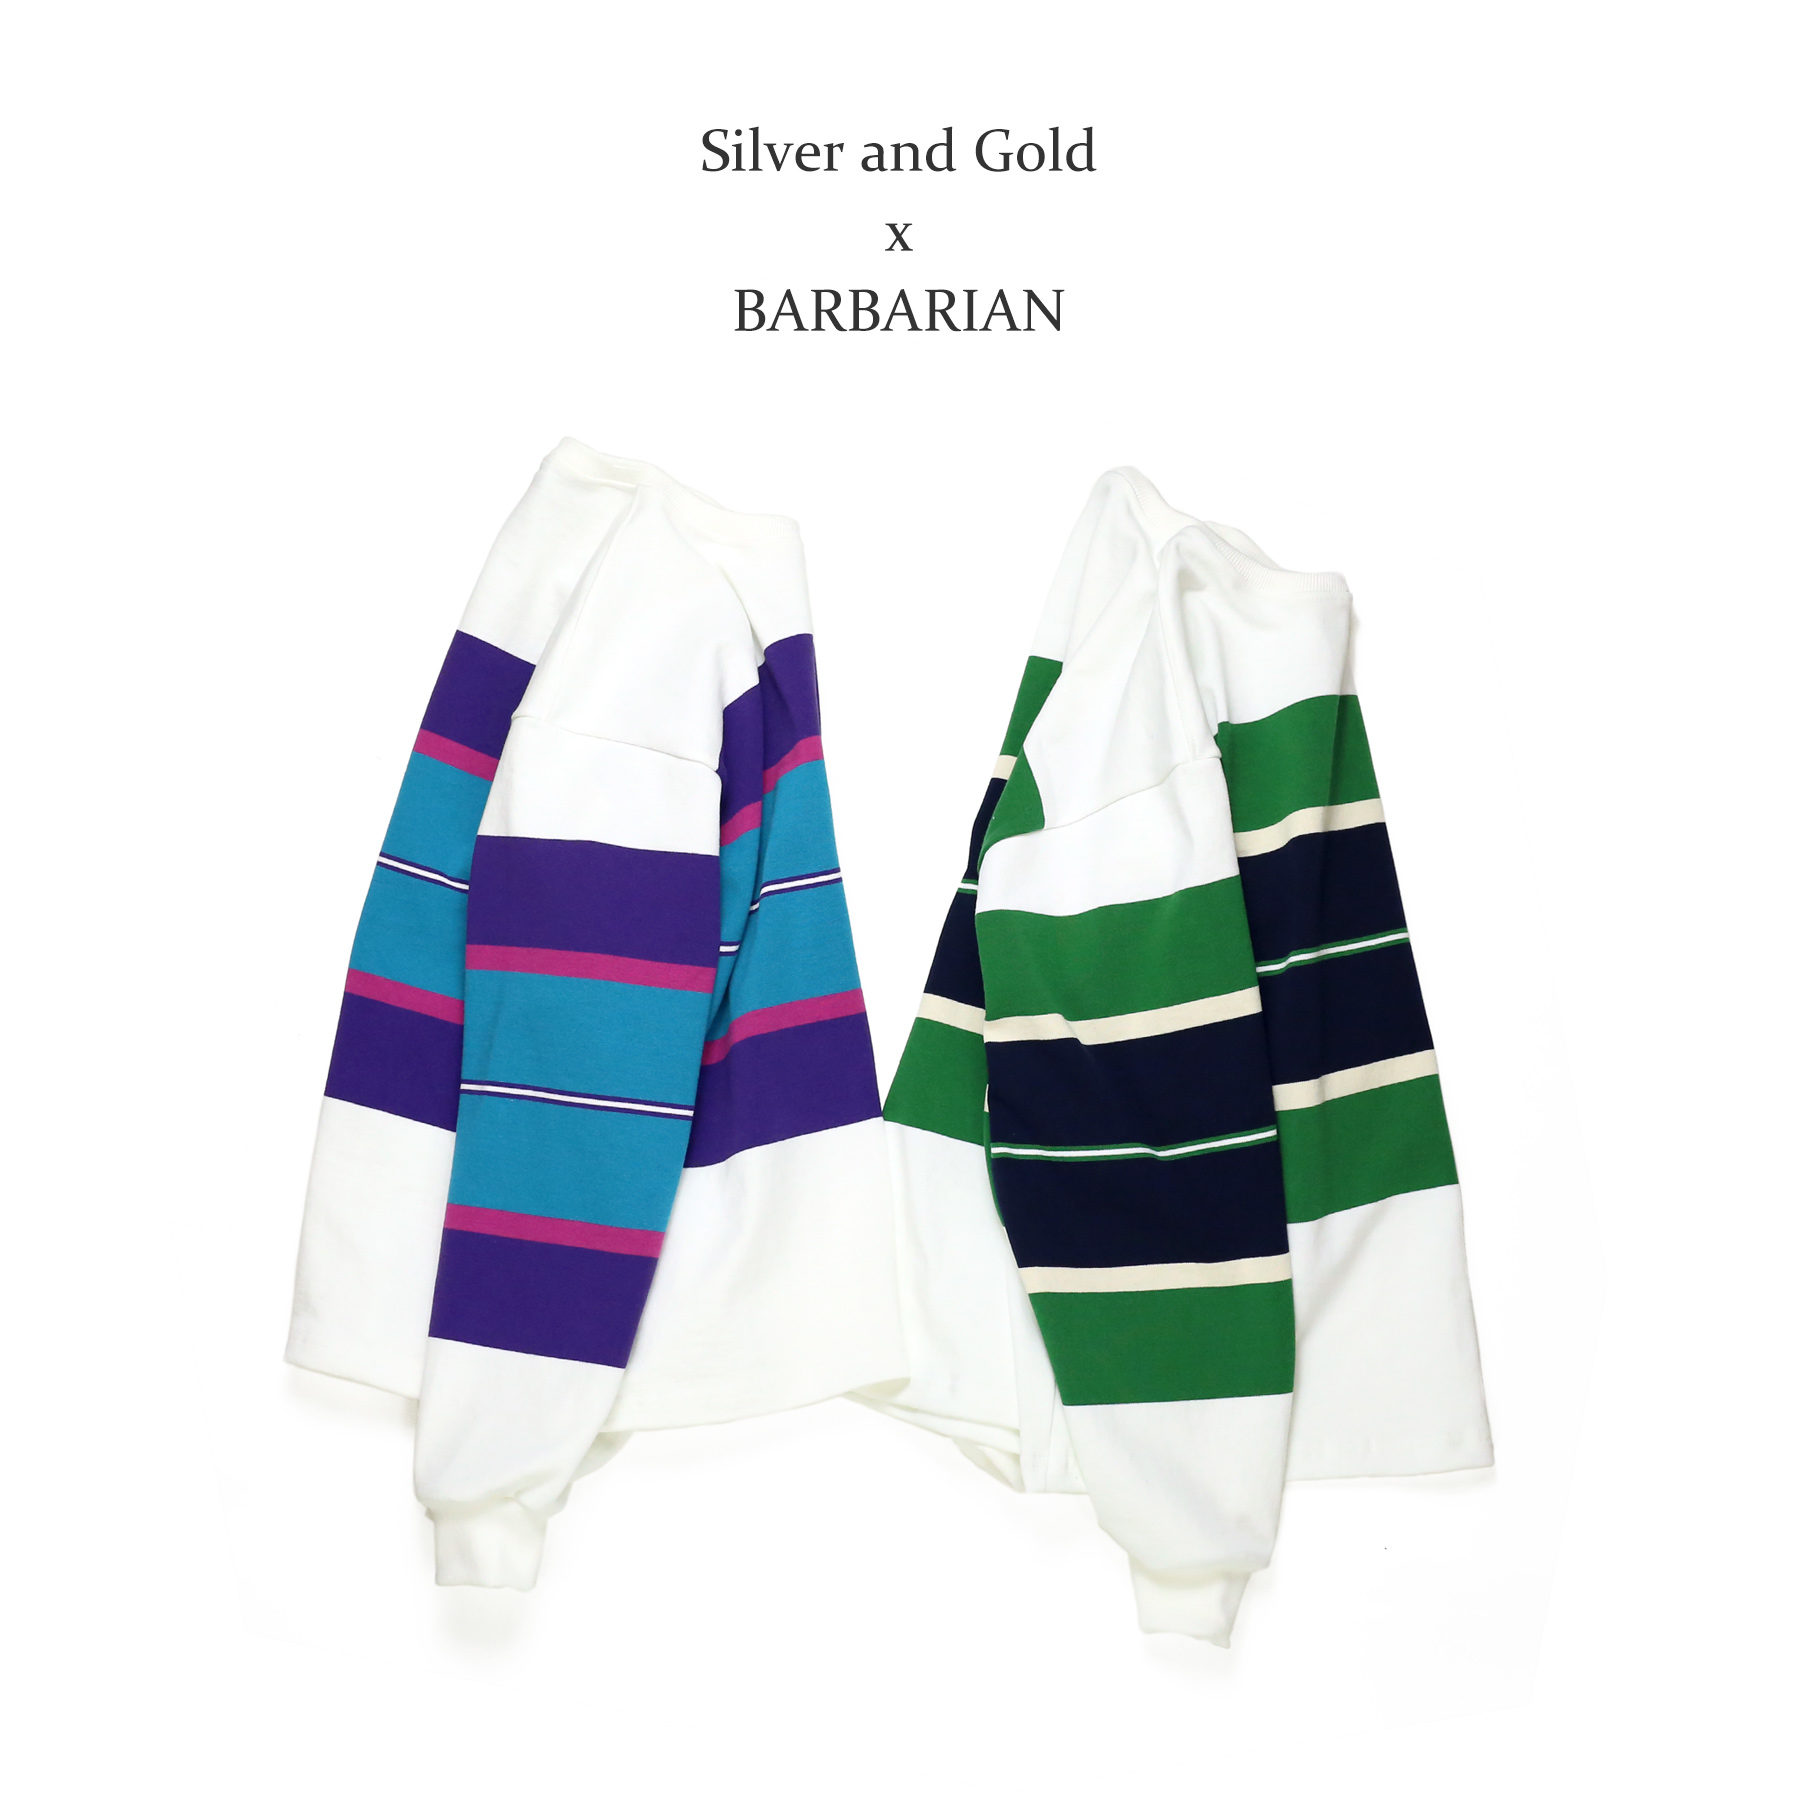 BARBARIAN – Silver and Gold